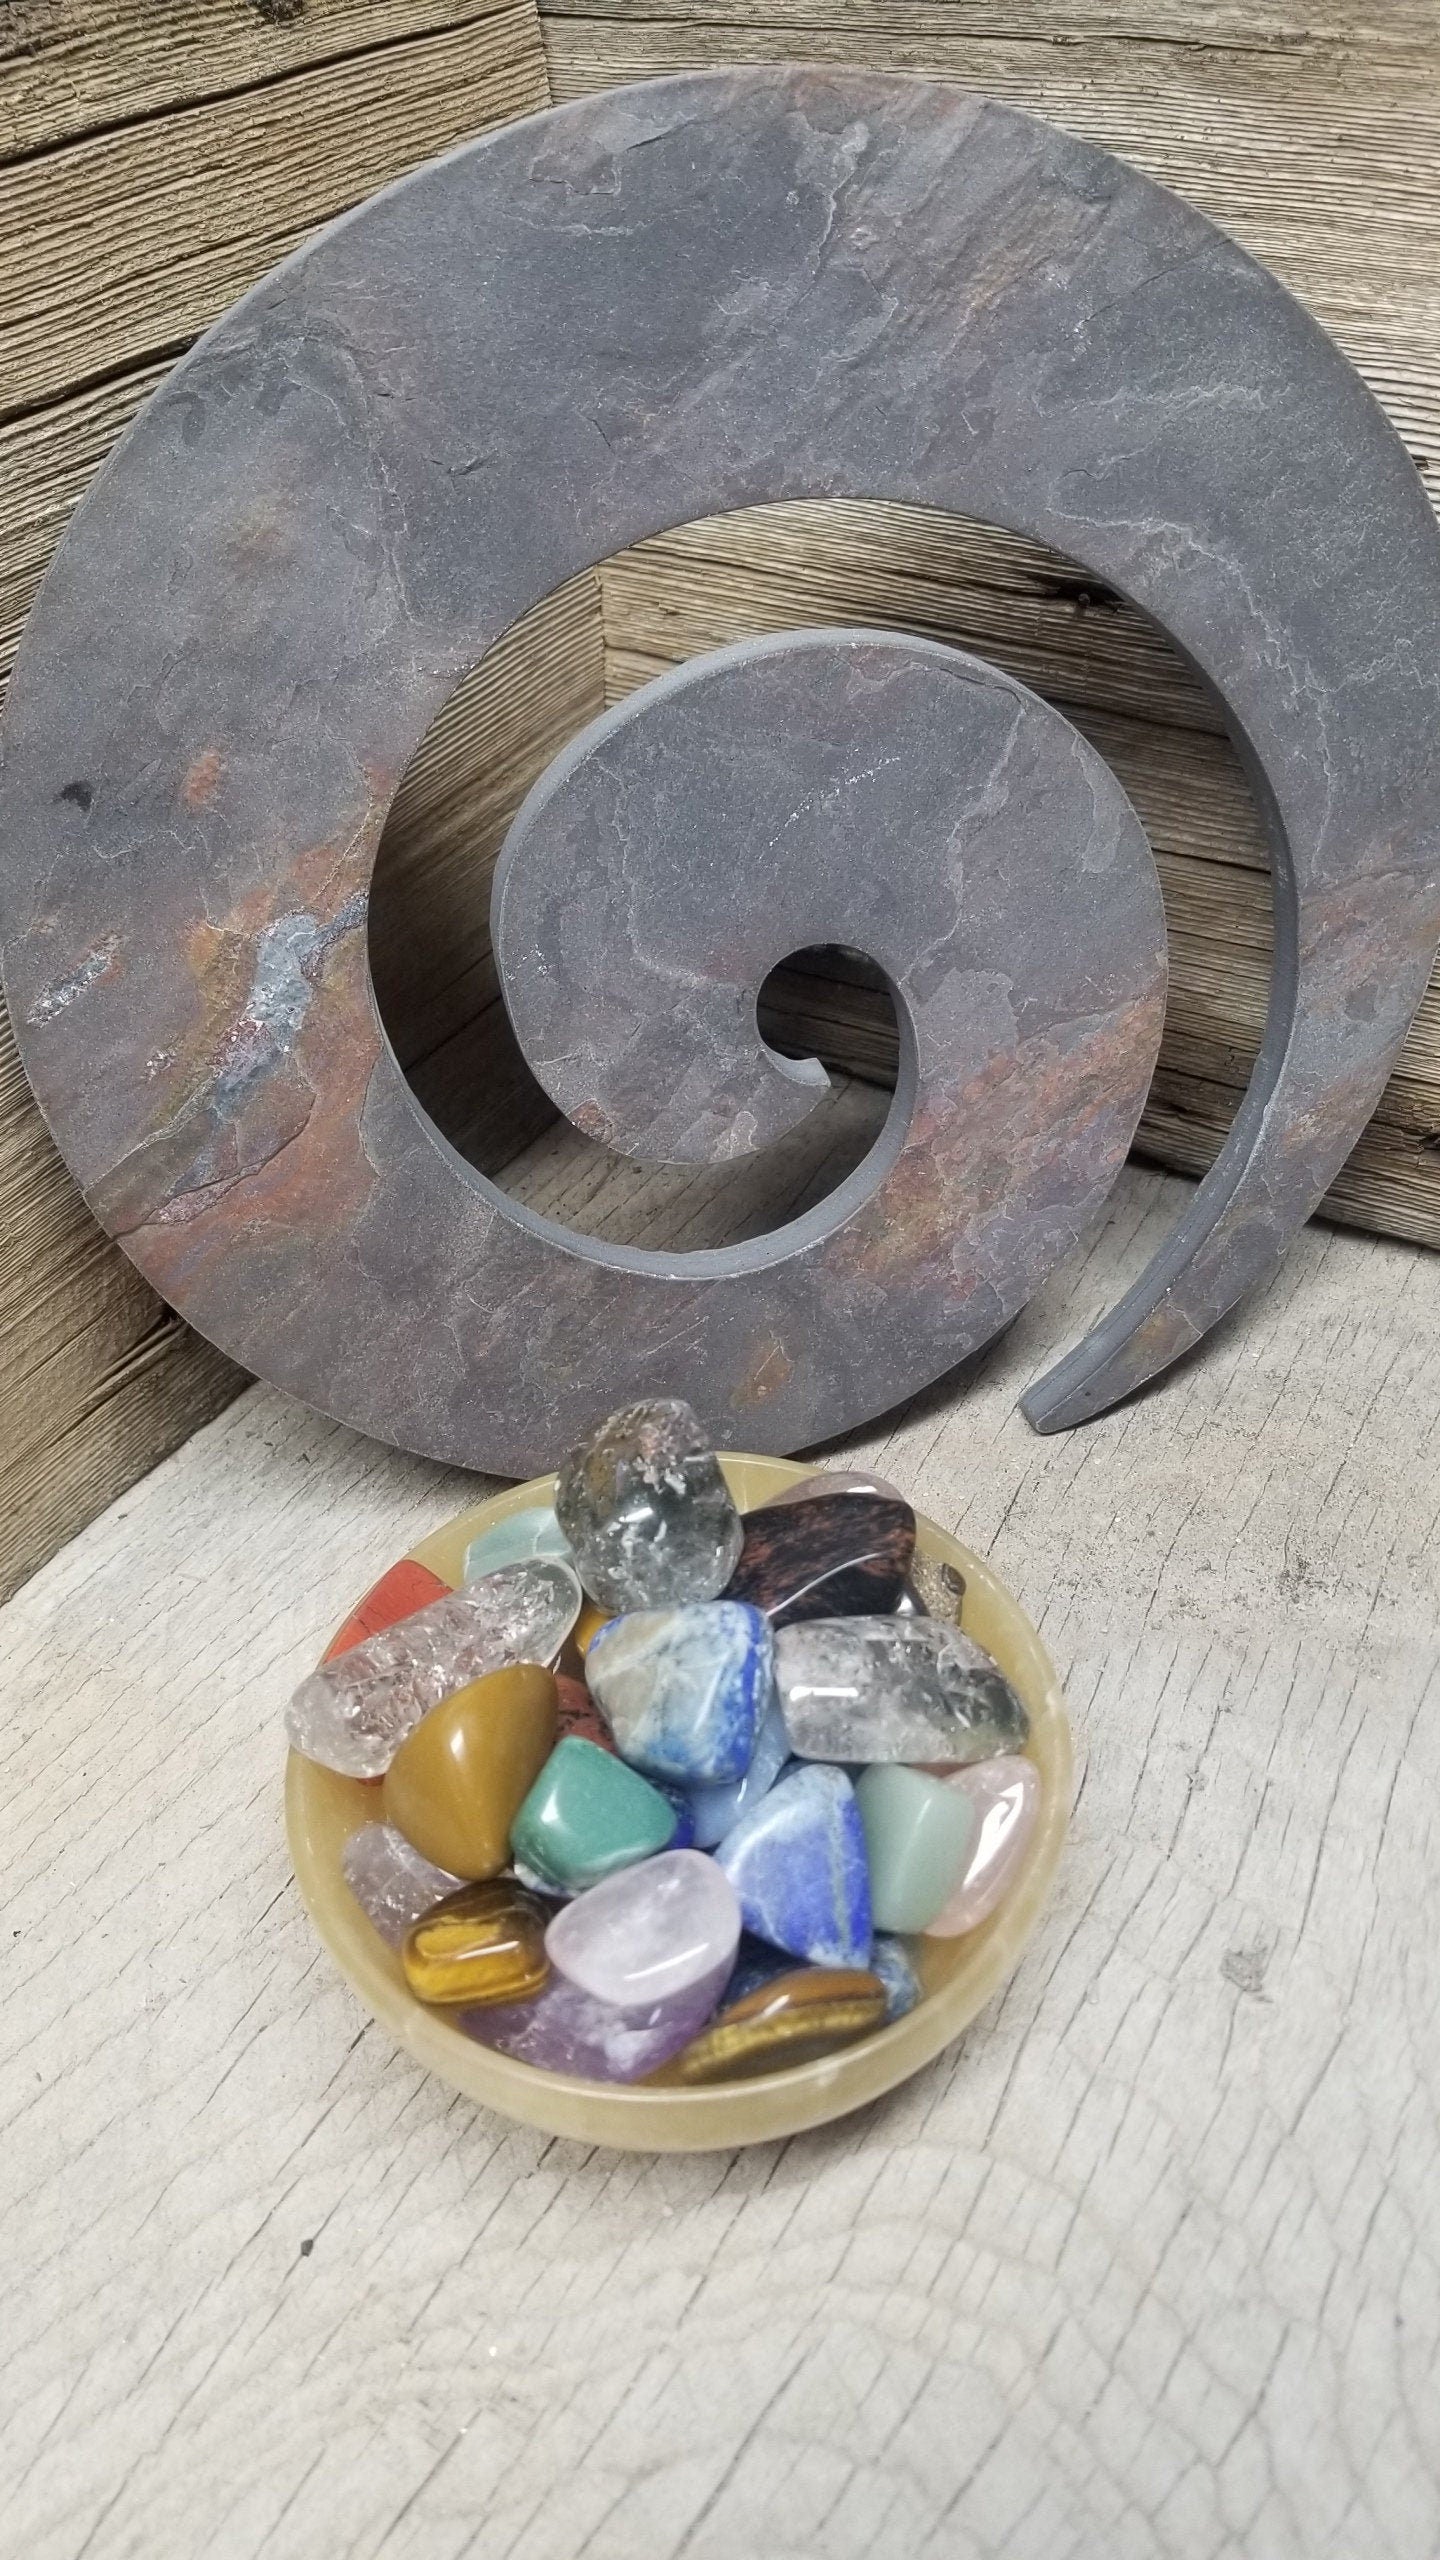 Surprise Stone from Assorted Mix of Polished Stones, One Stone (Approx 1 1/4" - 1 3/4" long) Wire Wrapping or Crystal Grid Supply BIN-1459